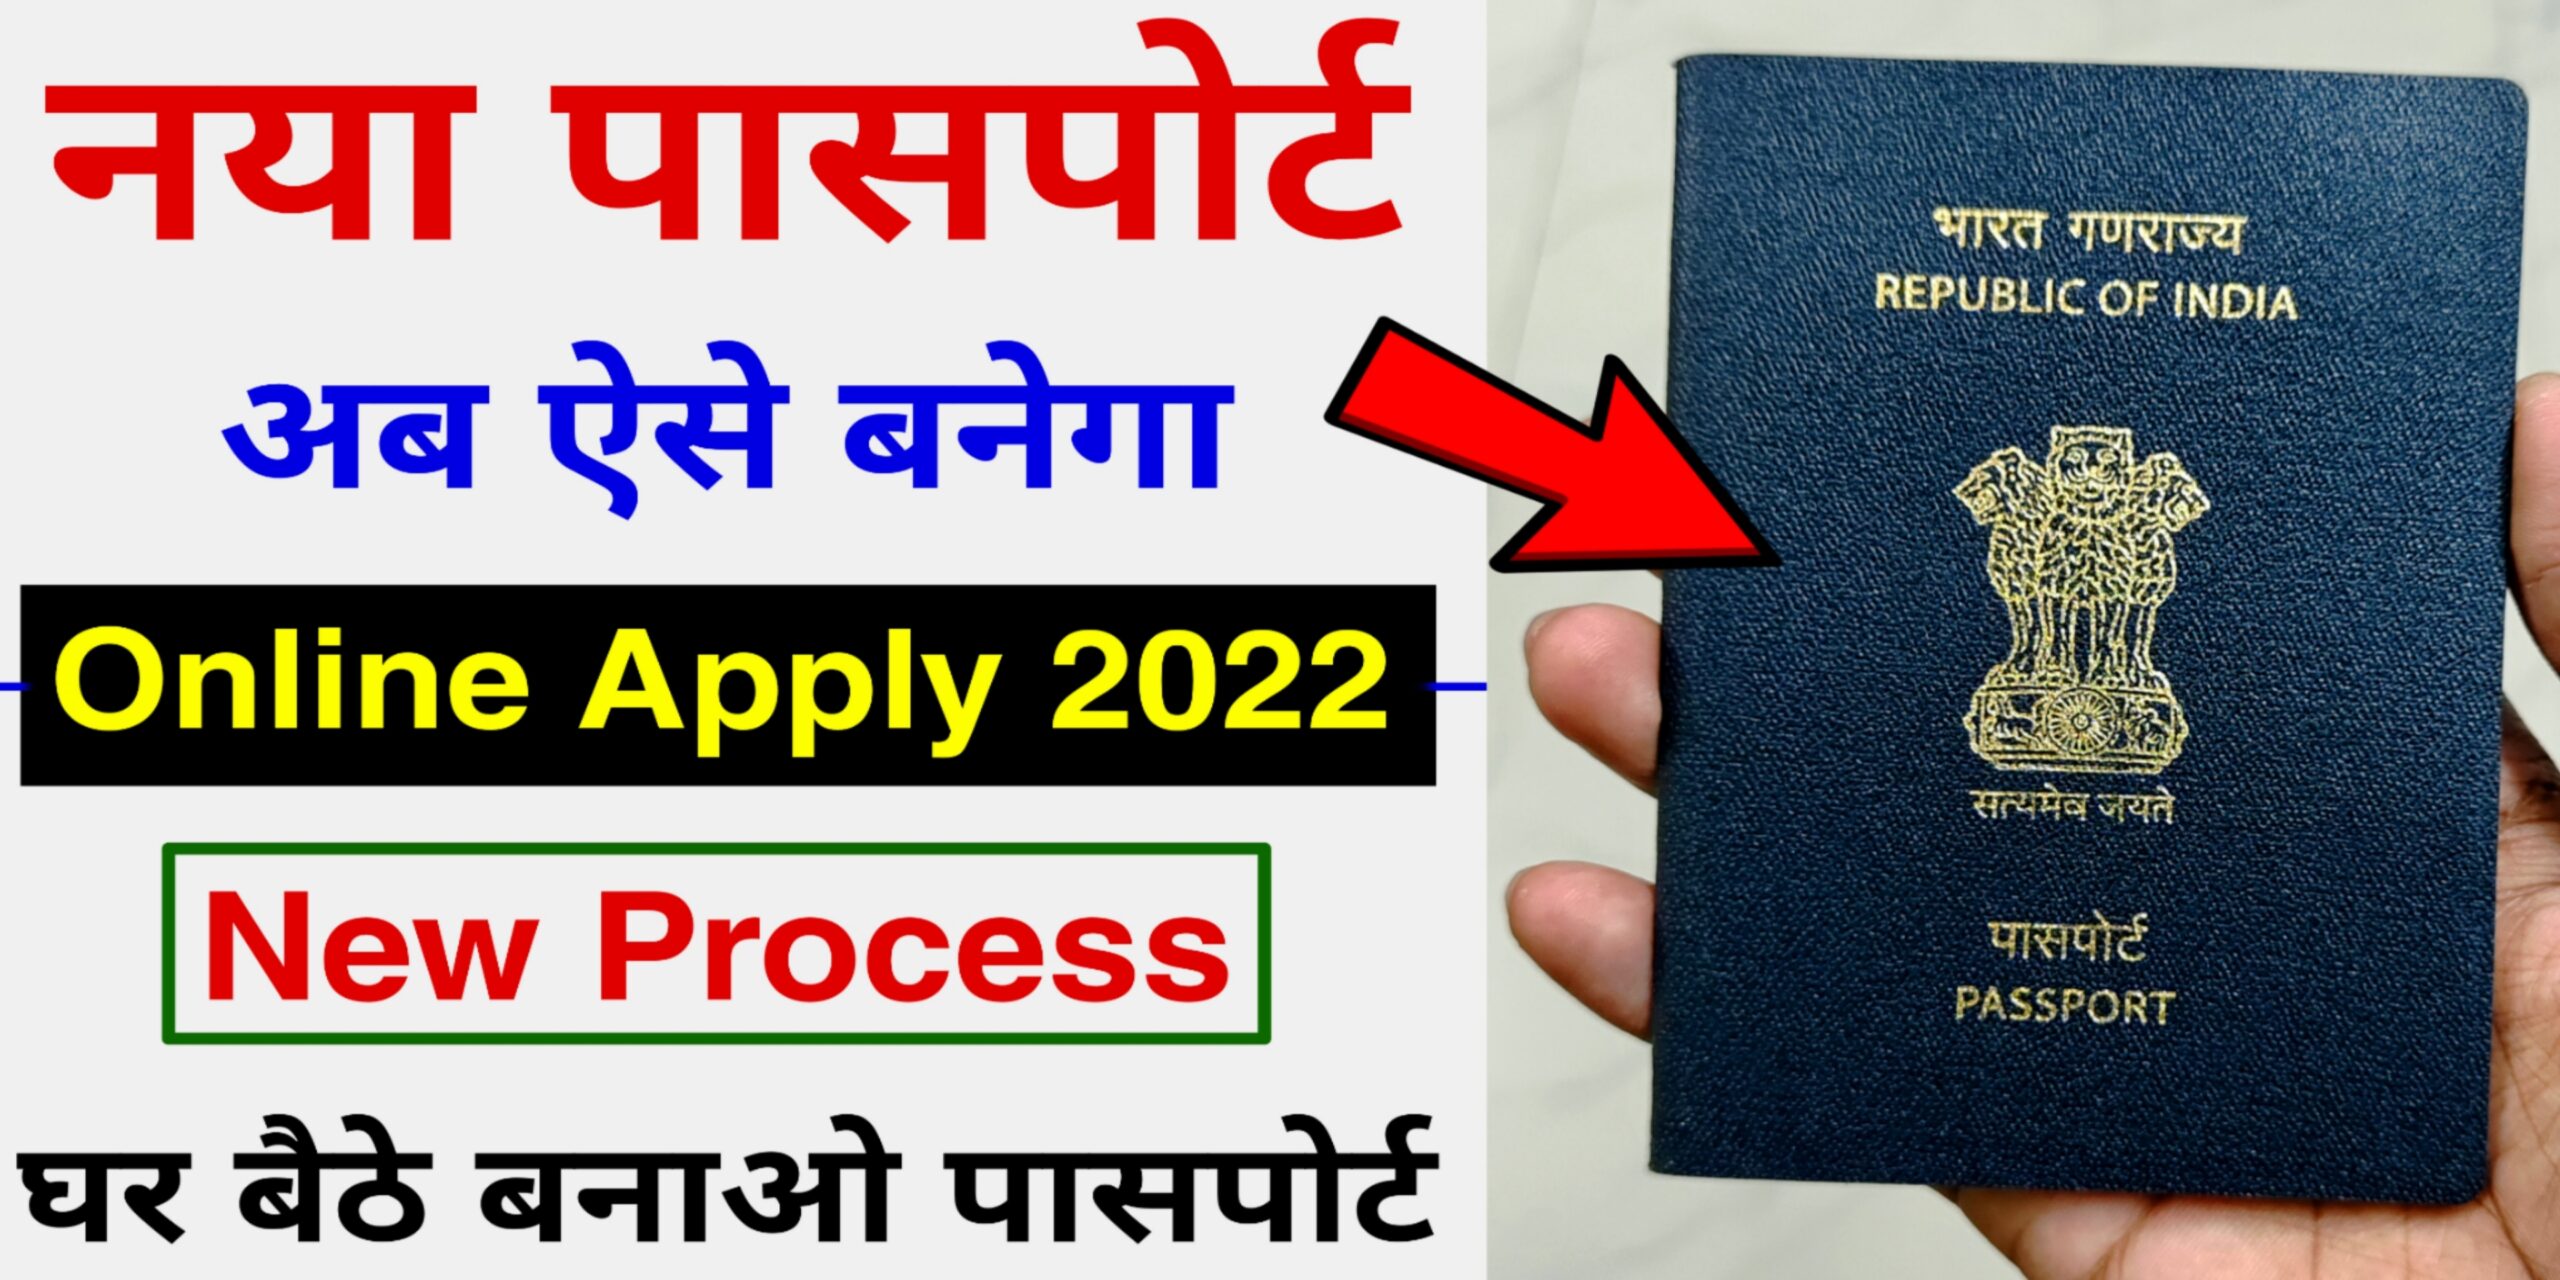 How to Apply for Passport Online